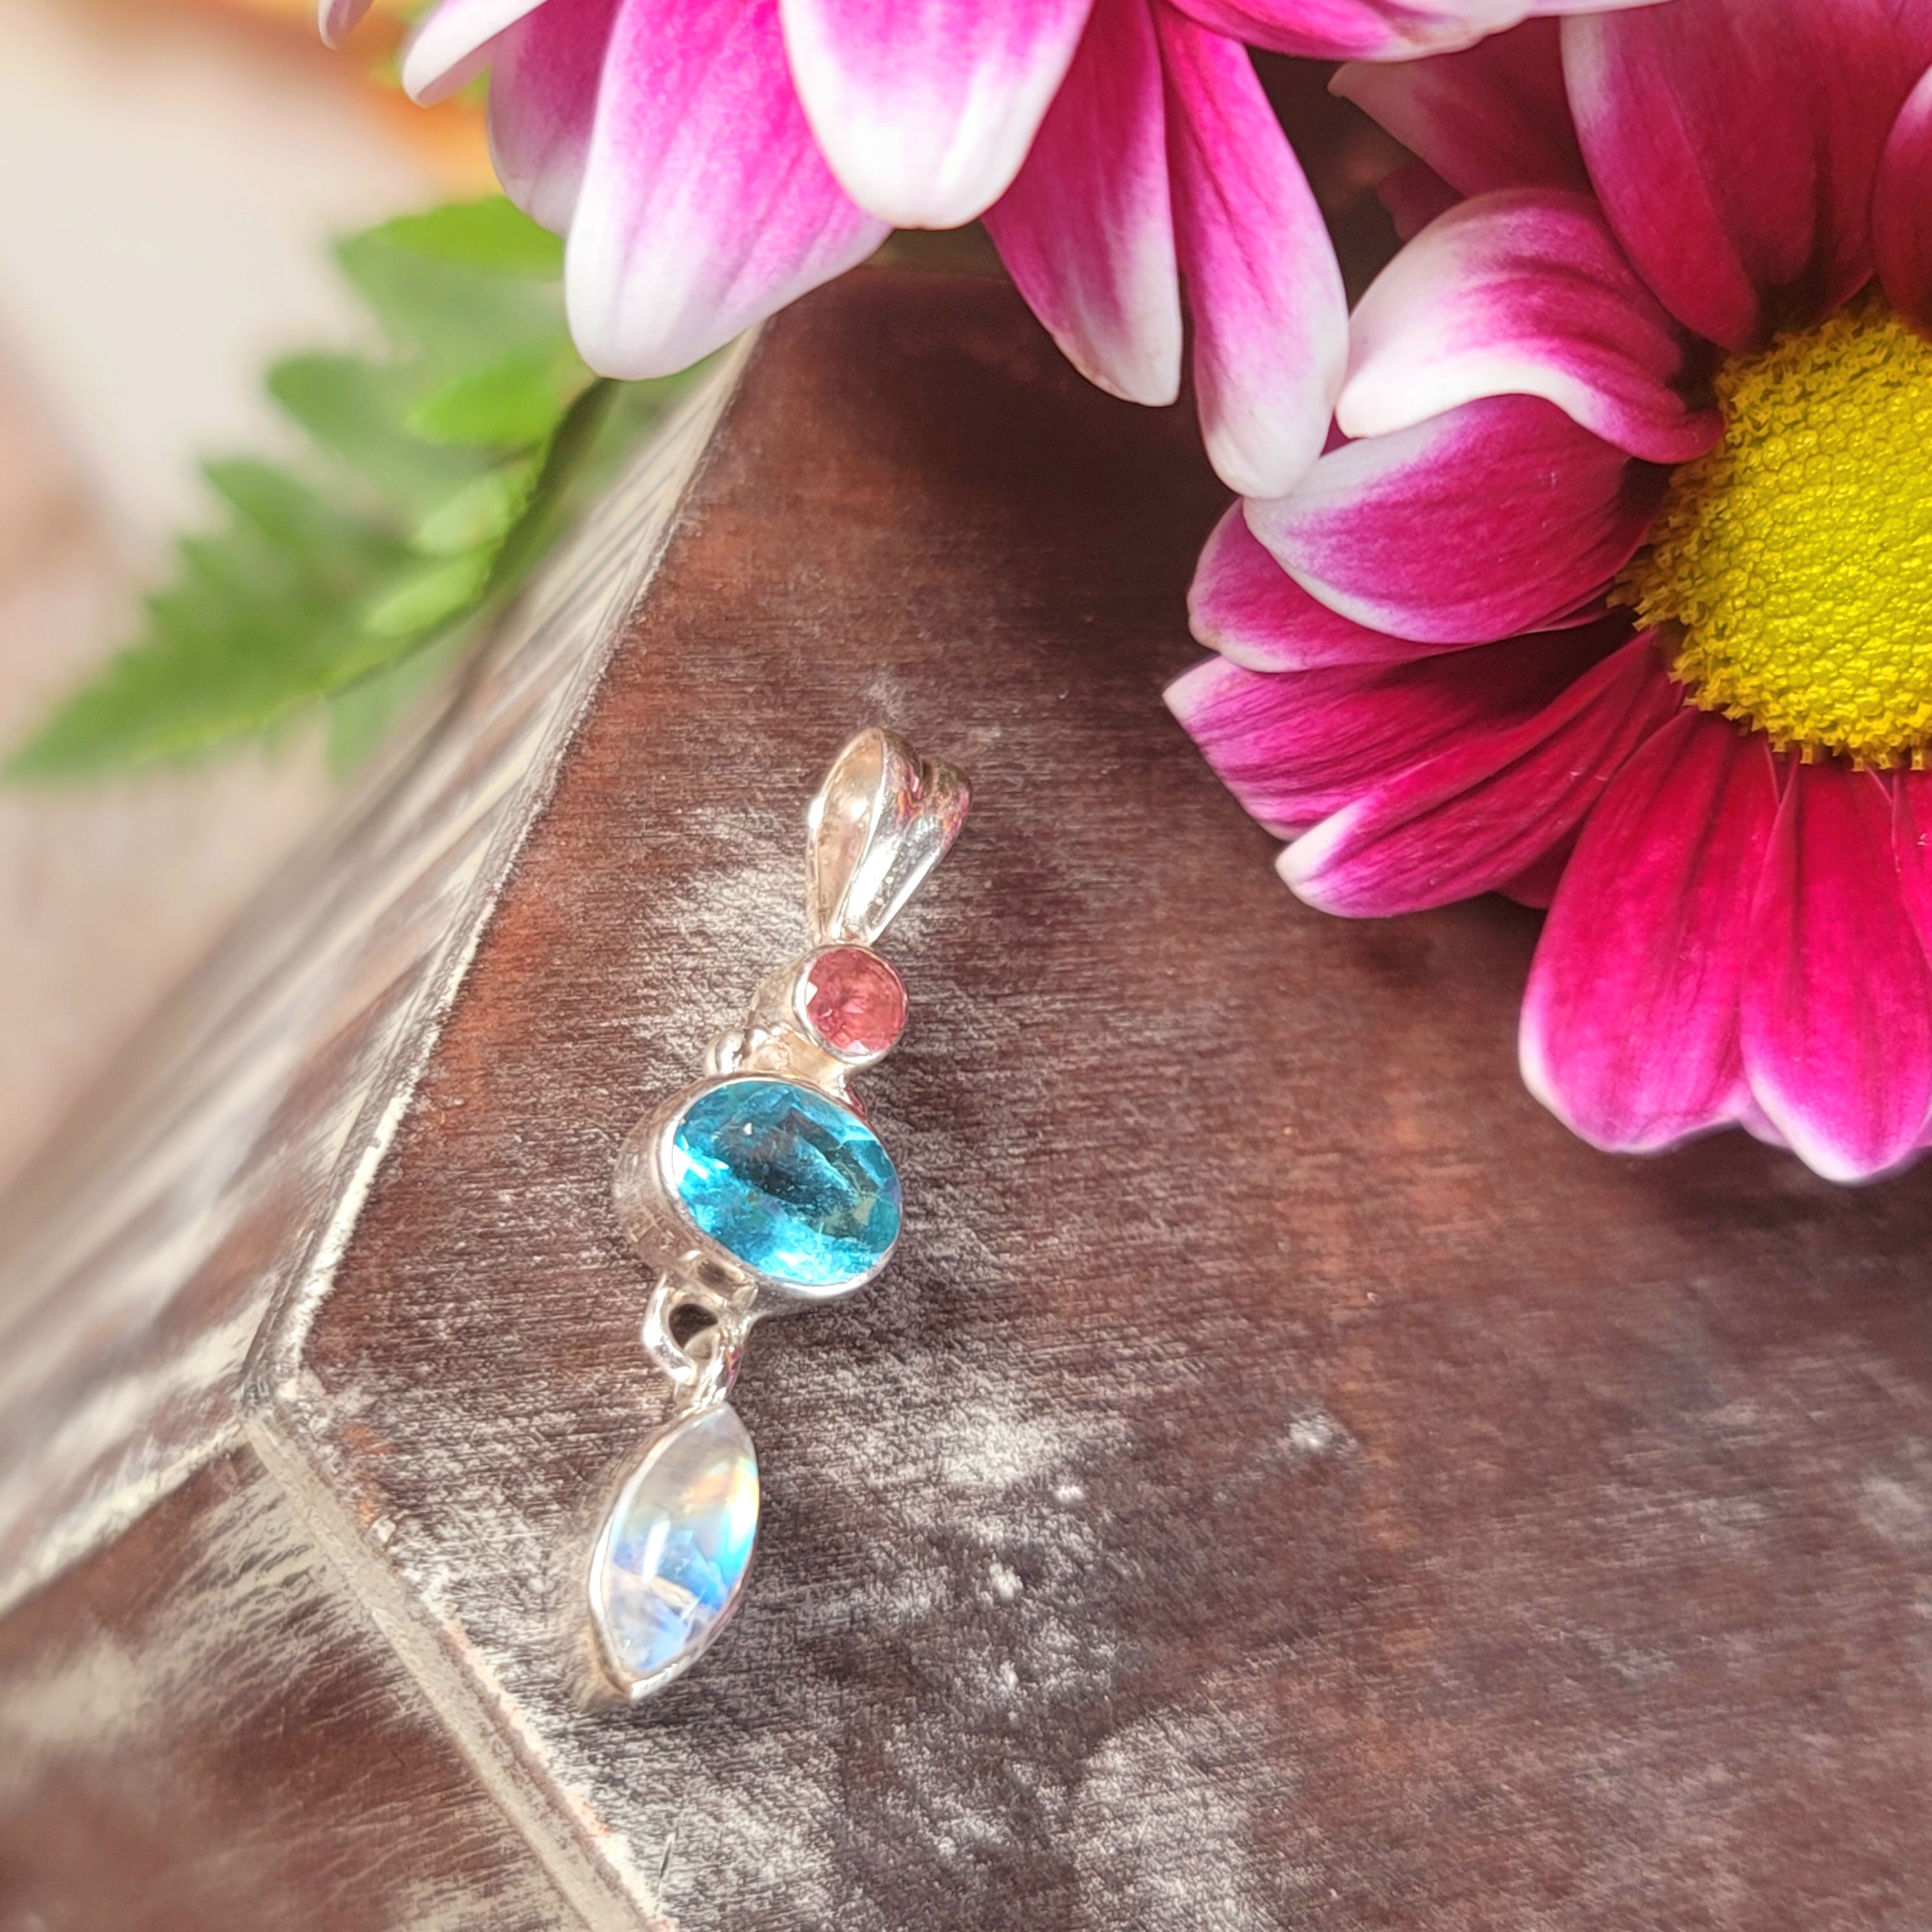 Rainbow Moonstone x Pink Tourmaline x Blue Apatite Pendant .925 Silver for New Beginnings and Goddess Energy